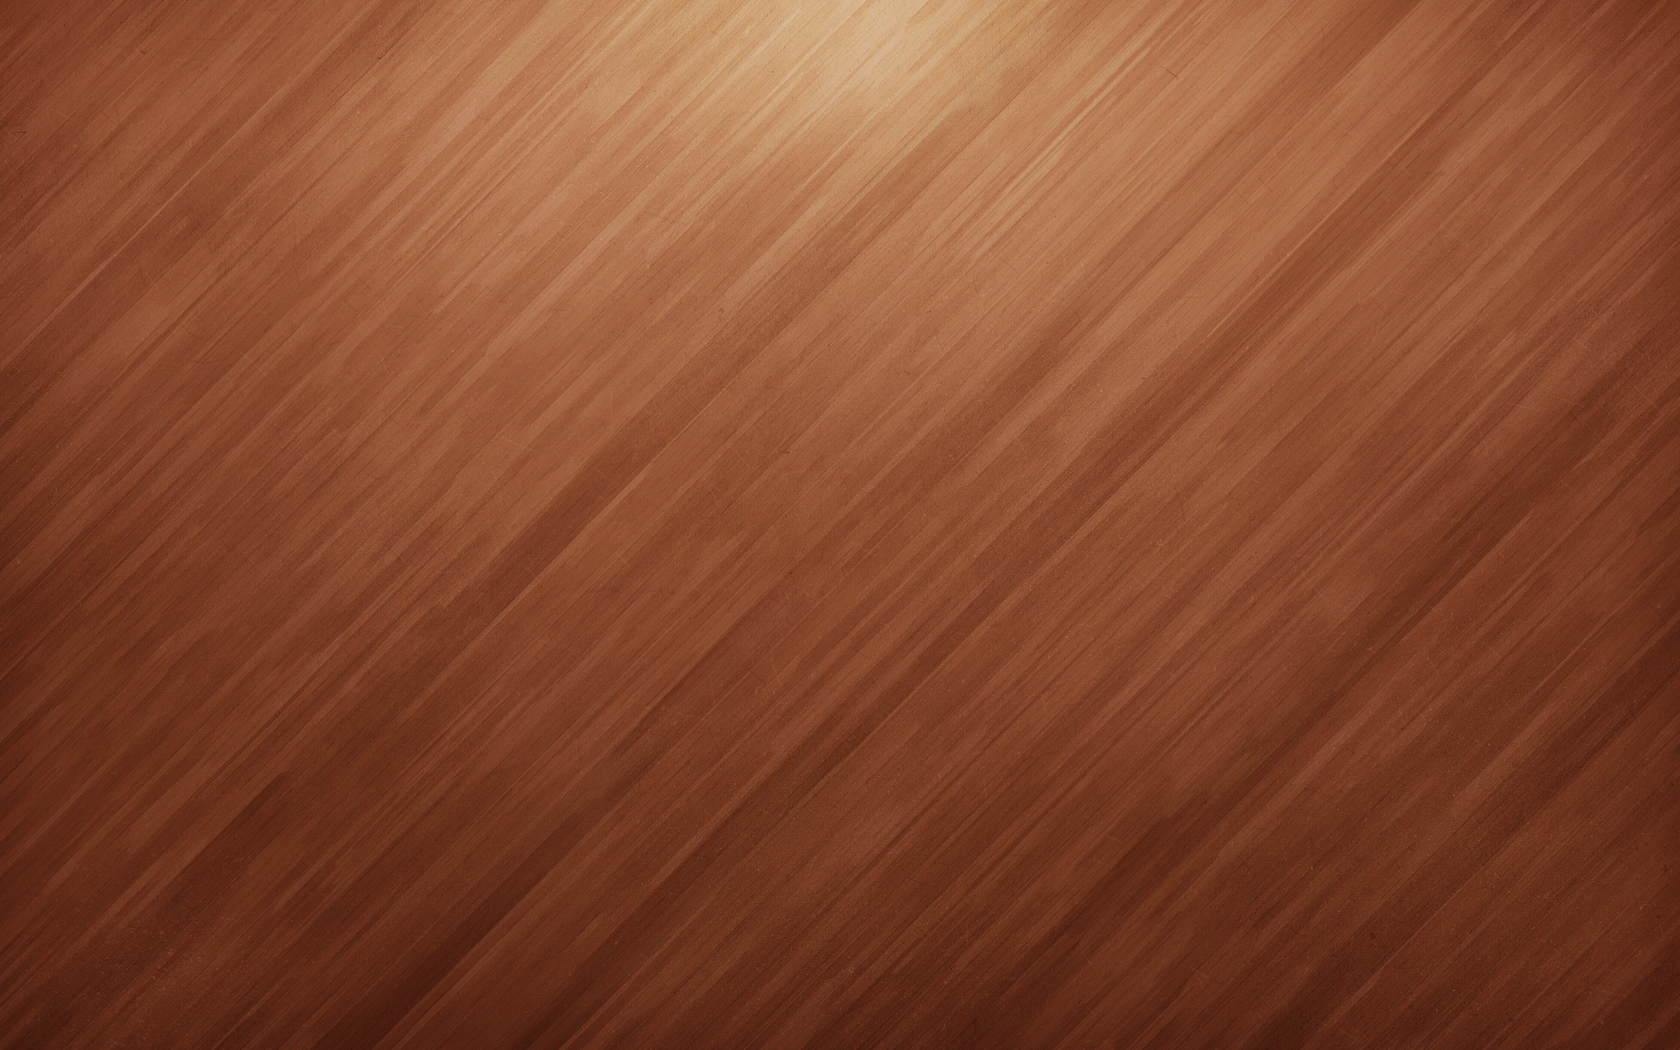 Full HD Wallpapers + Backgrounds, Wood, Brown